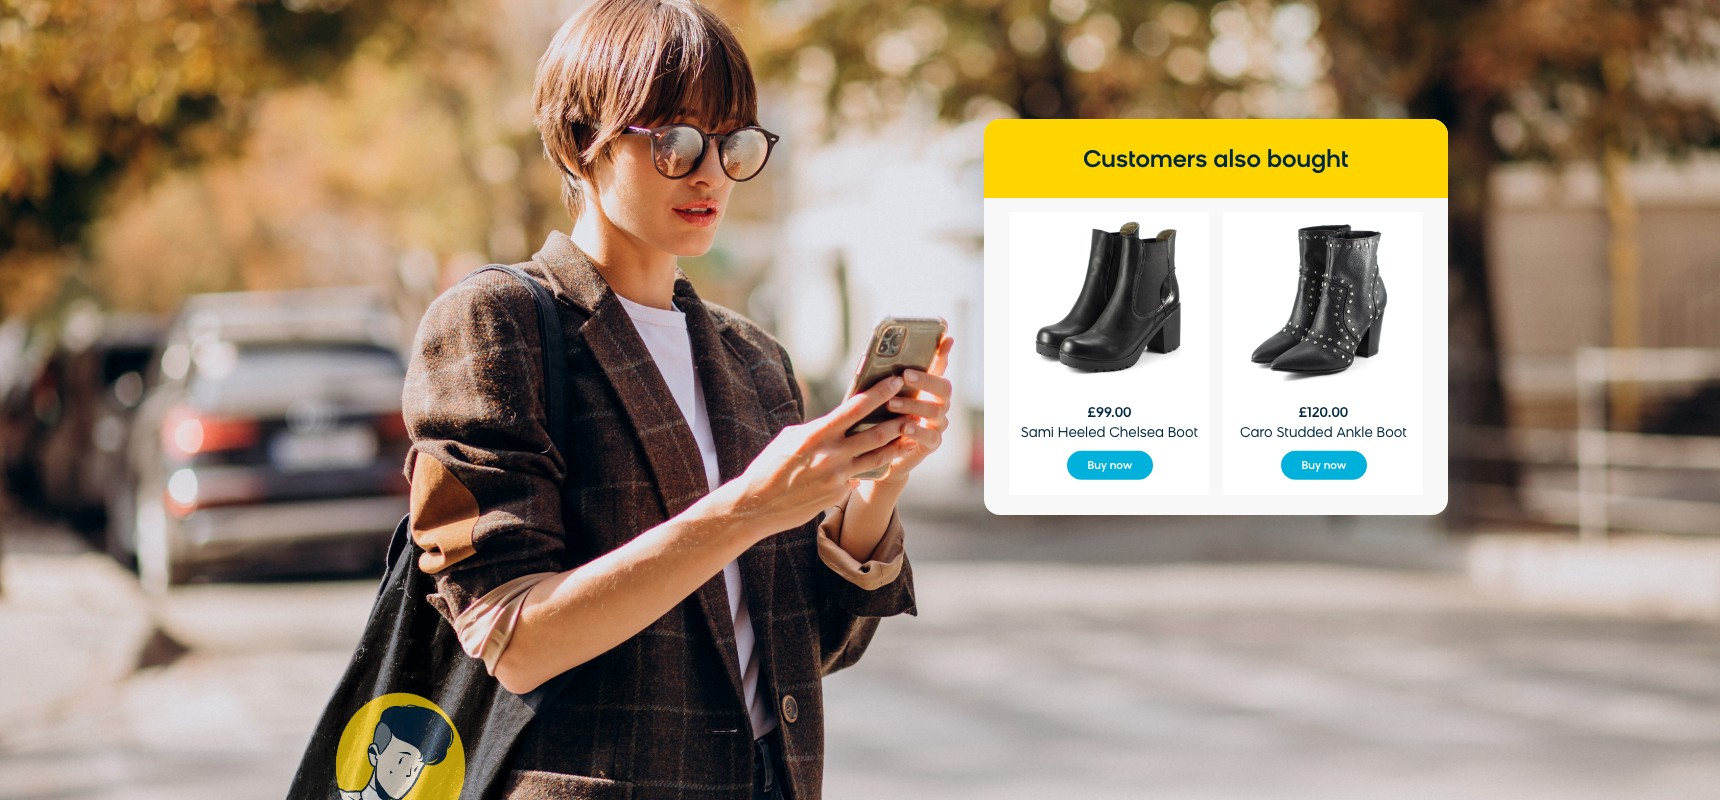 Example of a "customers also bought" module with Bloomreach